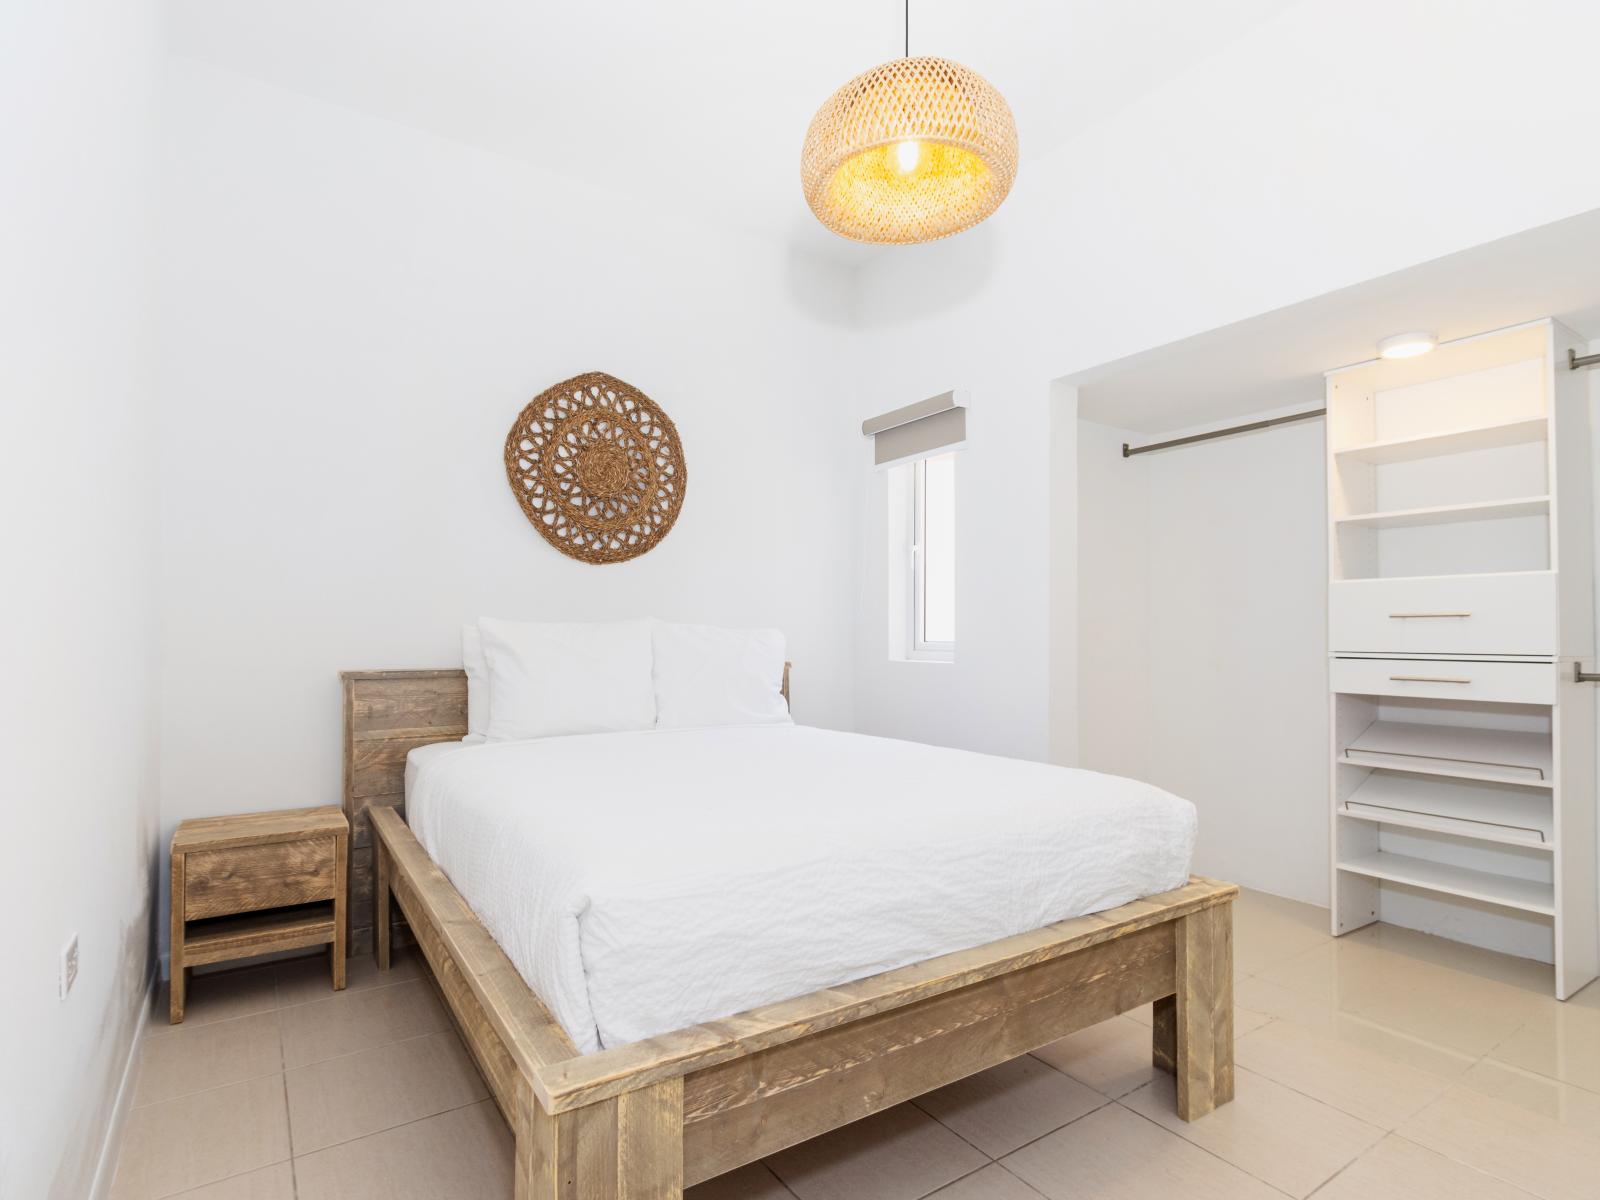 Comfy Bedroom of the Apartment in Noord Aruba - Queen size bed - Custom-built shelving ensures functionality - High-end finishes and refined details